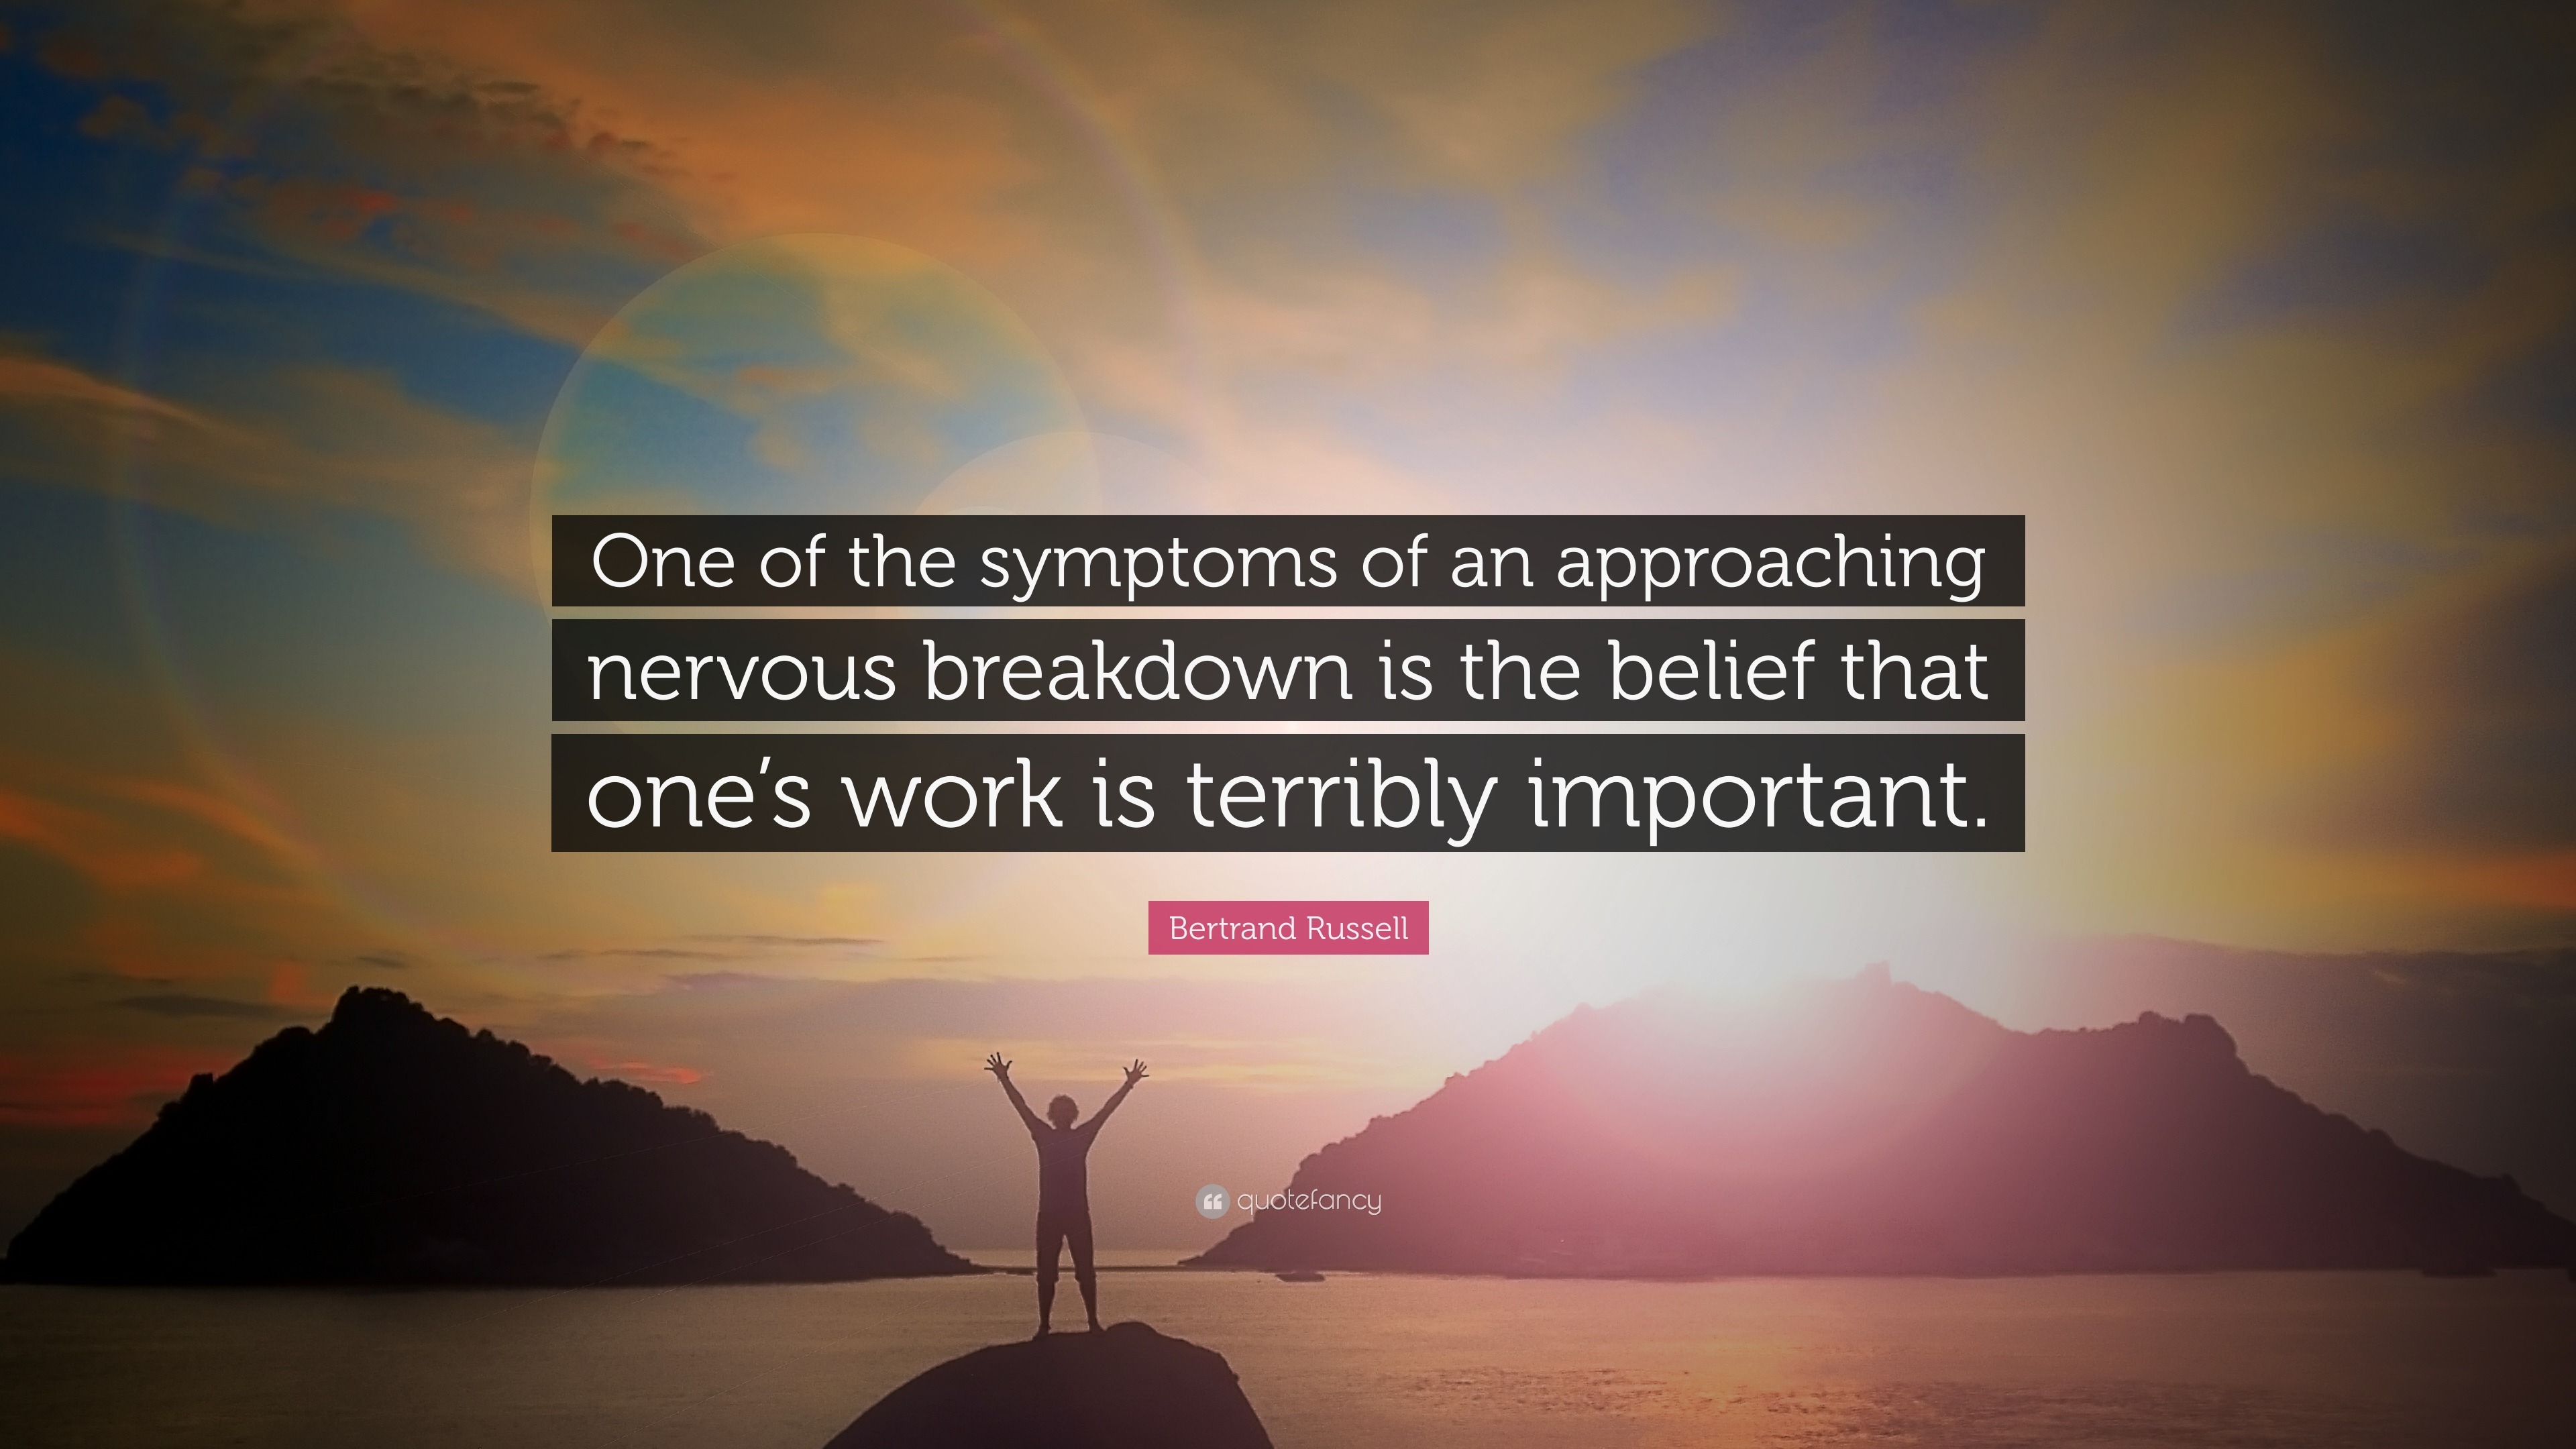 1727610 Bertrand Russell Quote One of the symptoms of an approaching